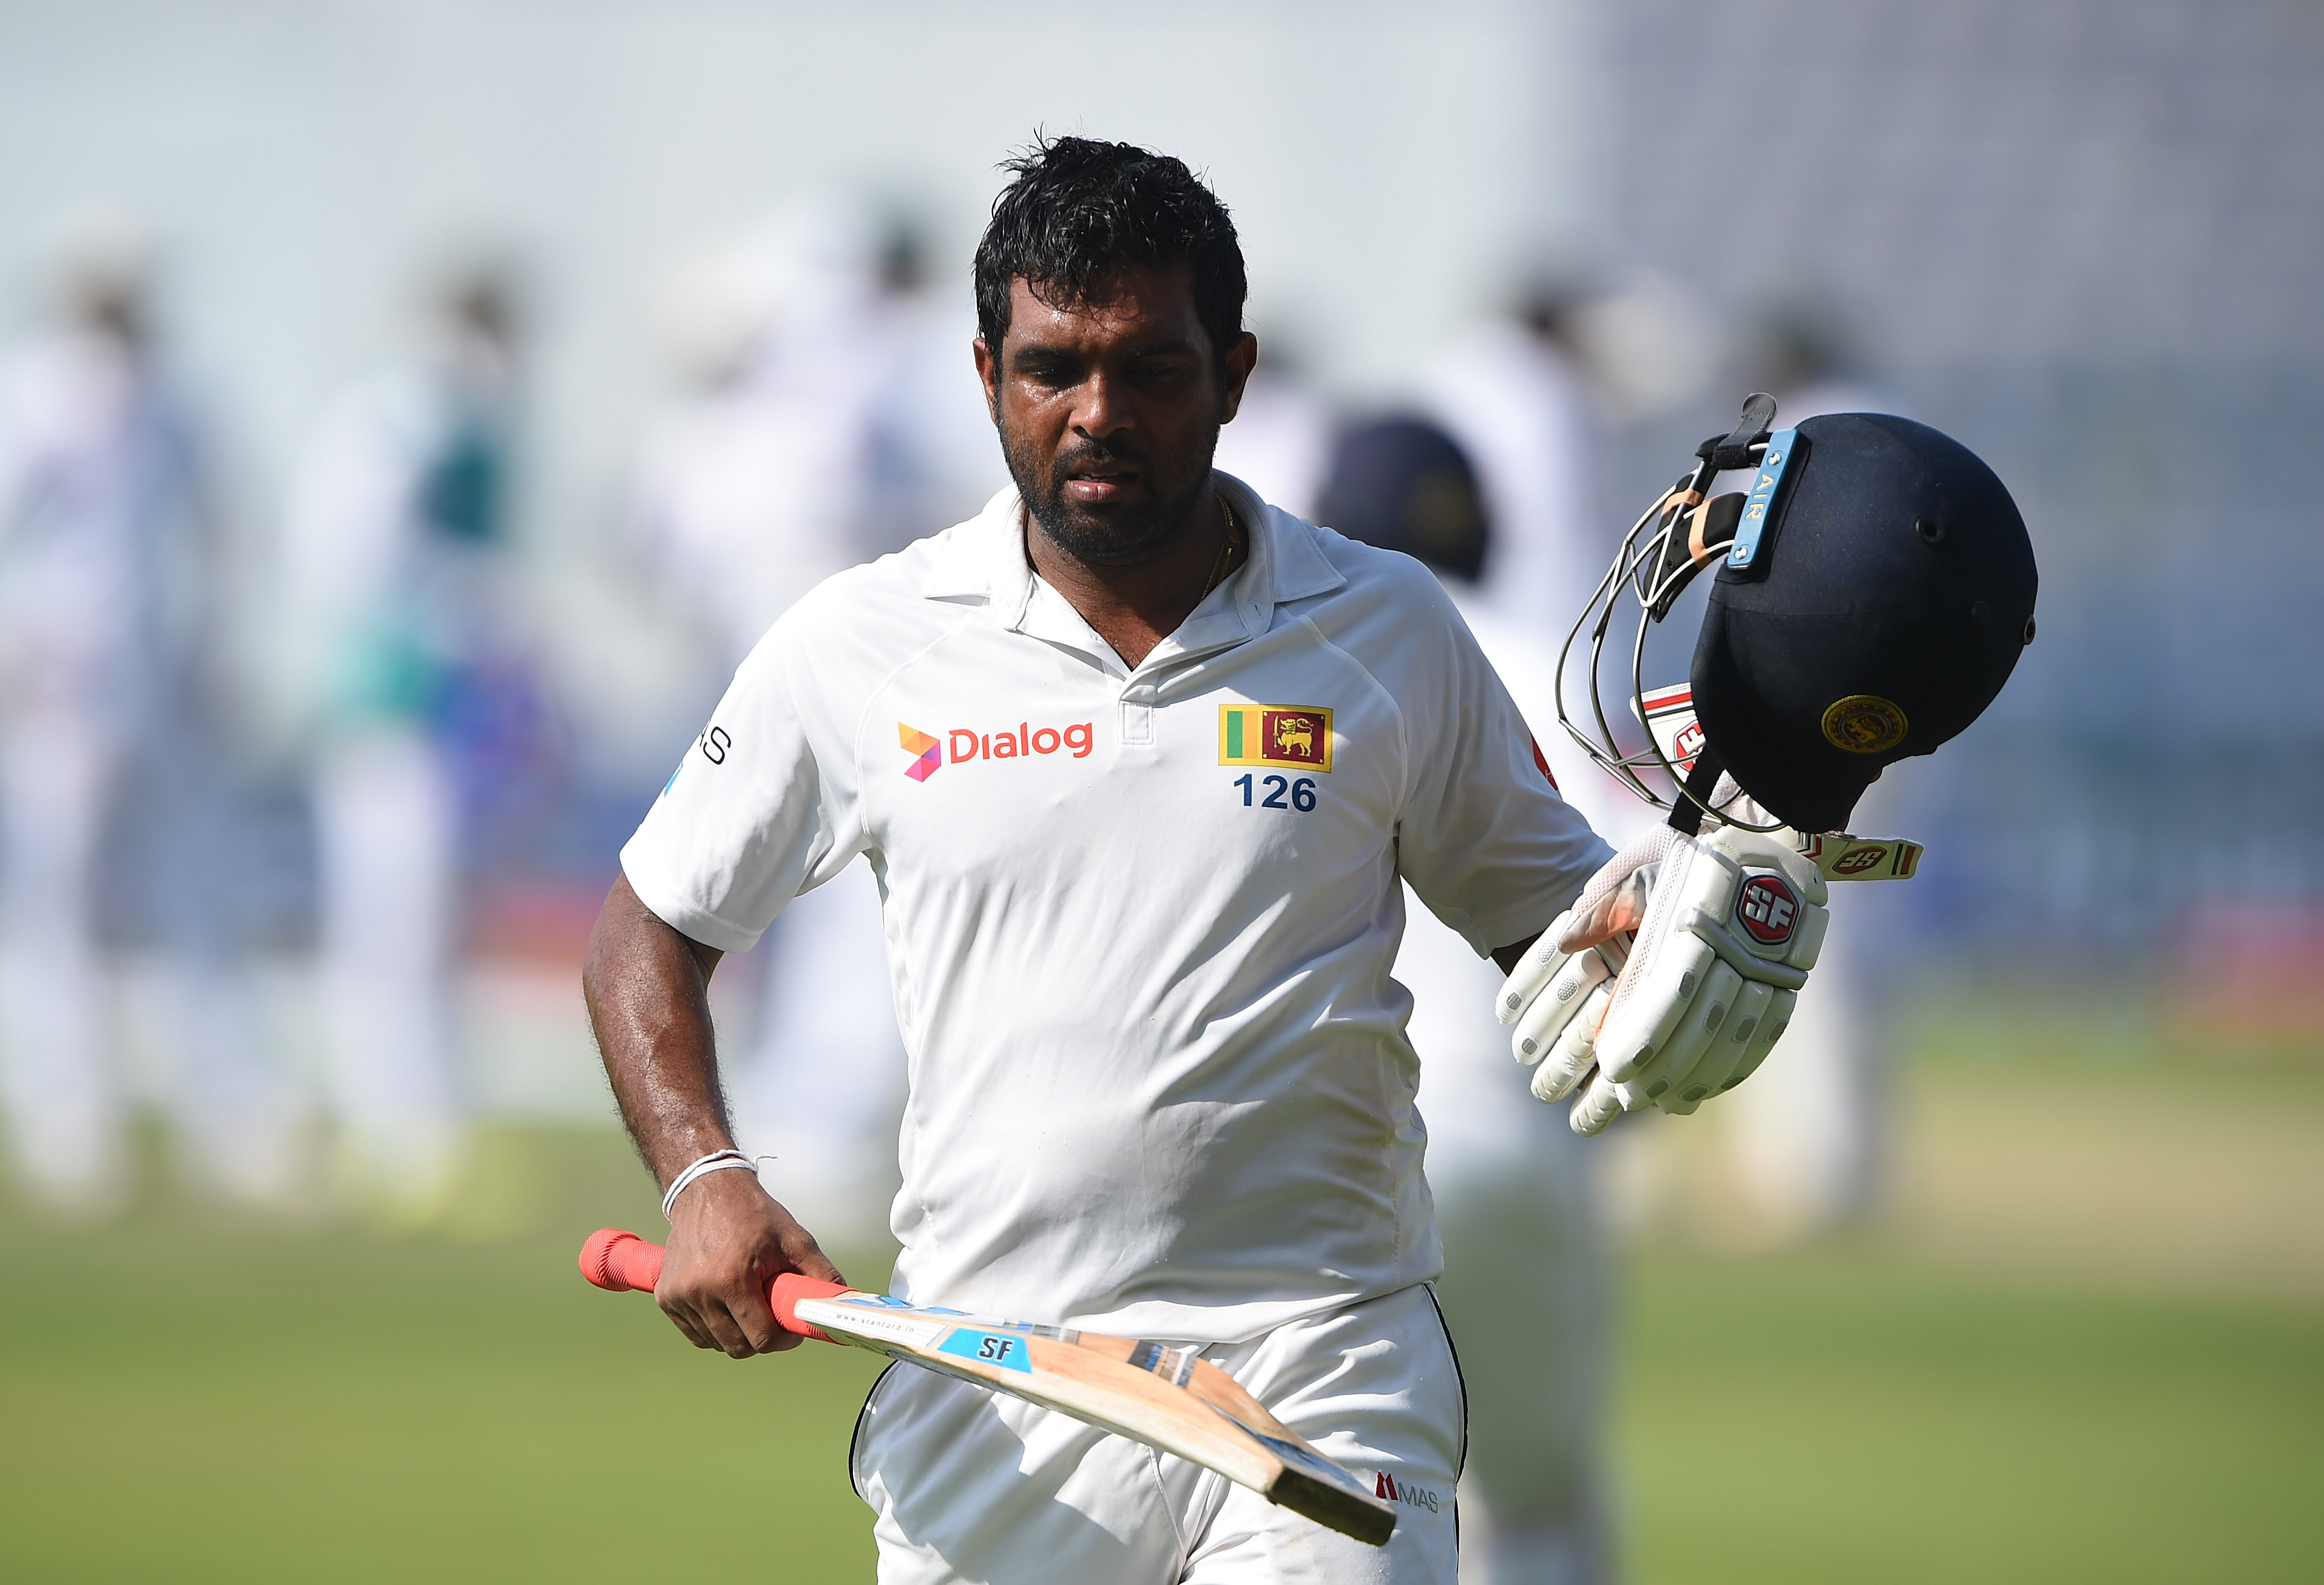 WATCH | Yet another DRS-gate in India as Dilruwan Perera takes review after signal from dugout